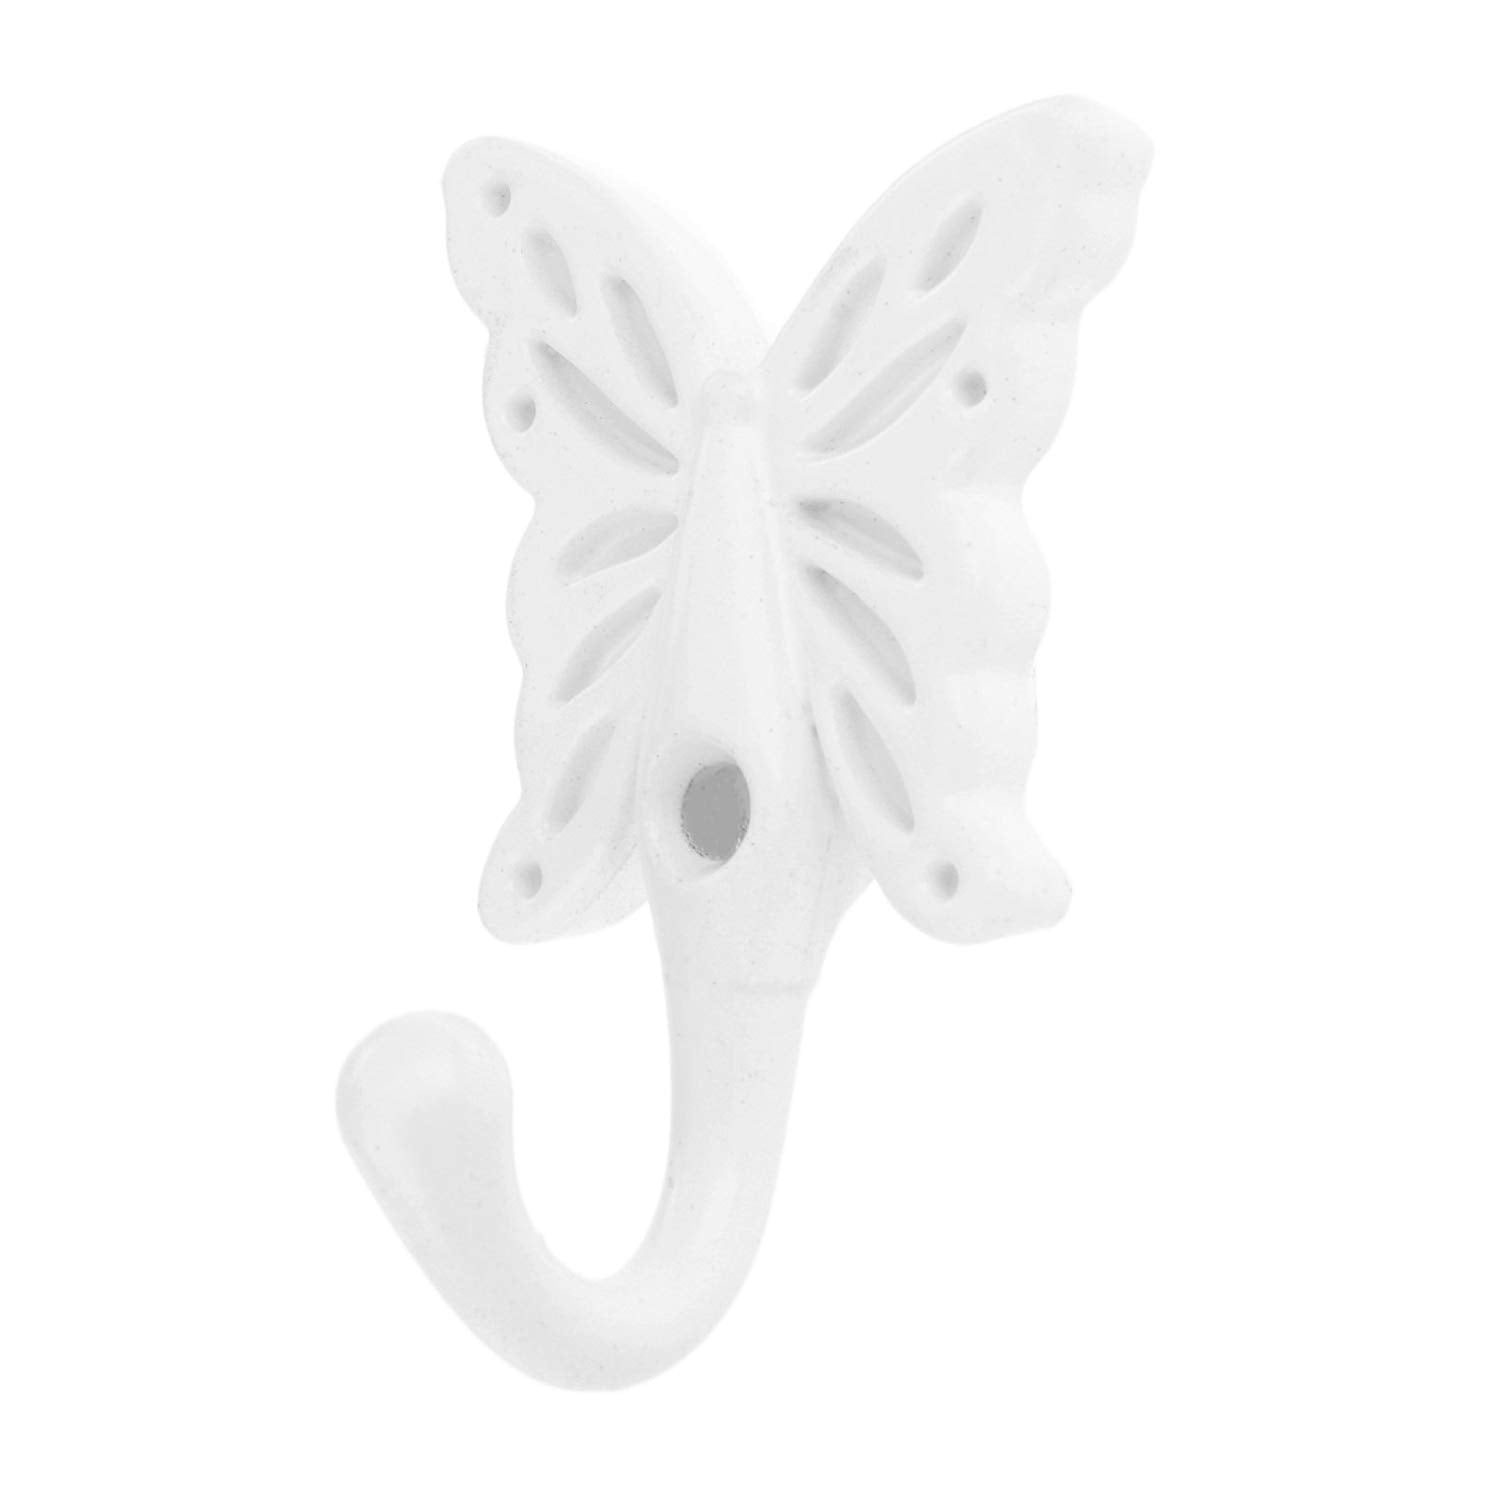 Dophee 5Pcs White Hanger Hooks Modern Nordic Style for Wall Door Clothes Coat Hat Holder Butterfly Shaped